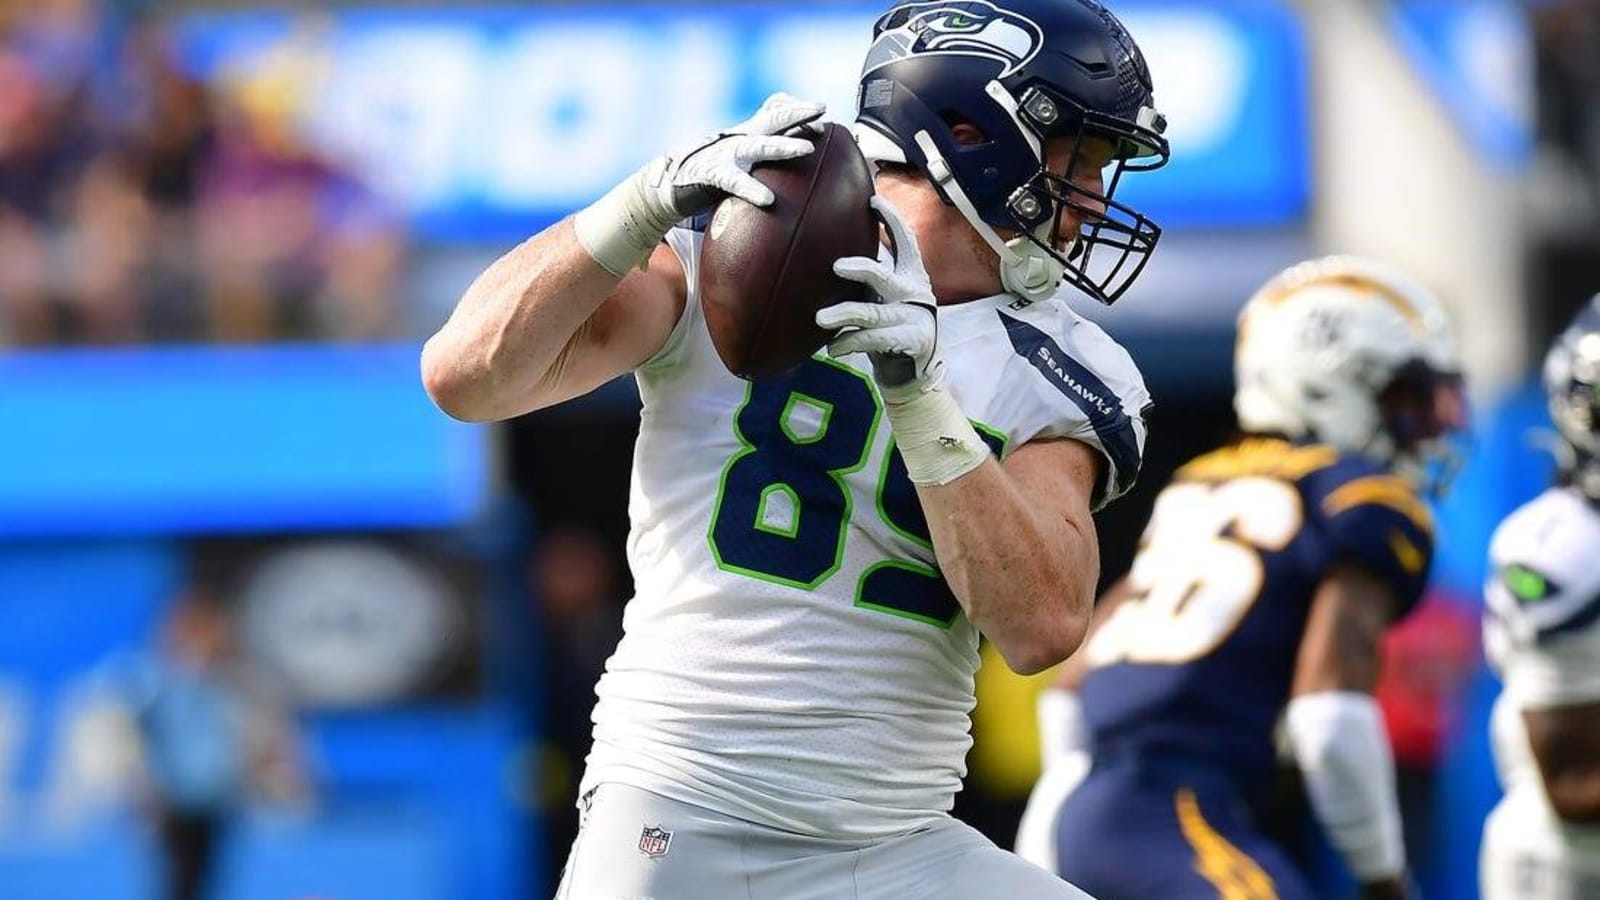 Seahawks place TE Will Dissly (knee) on IR